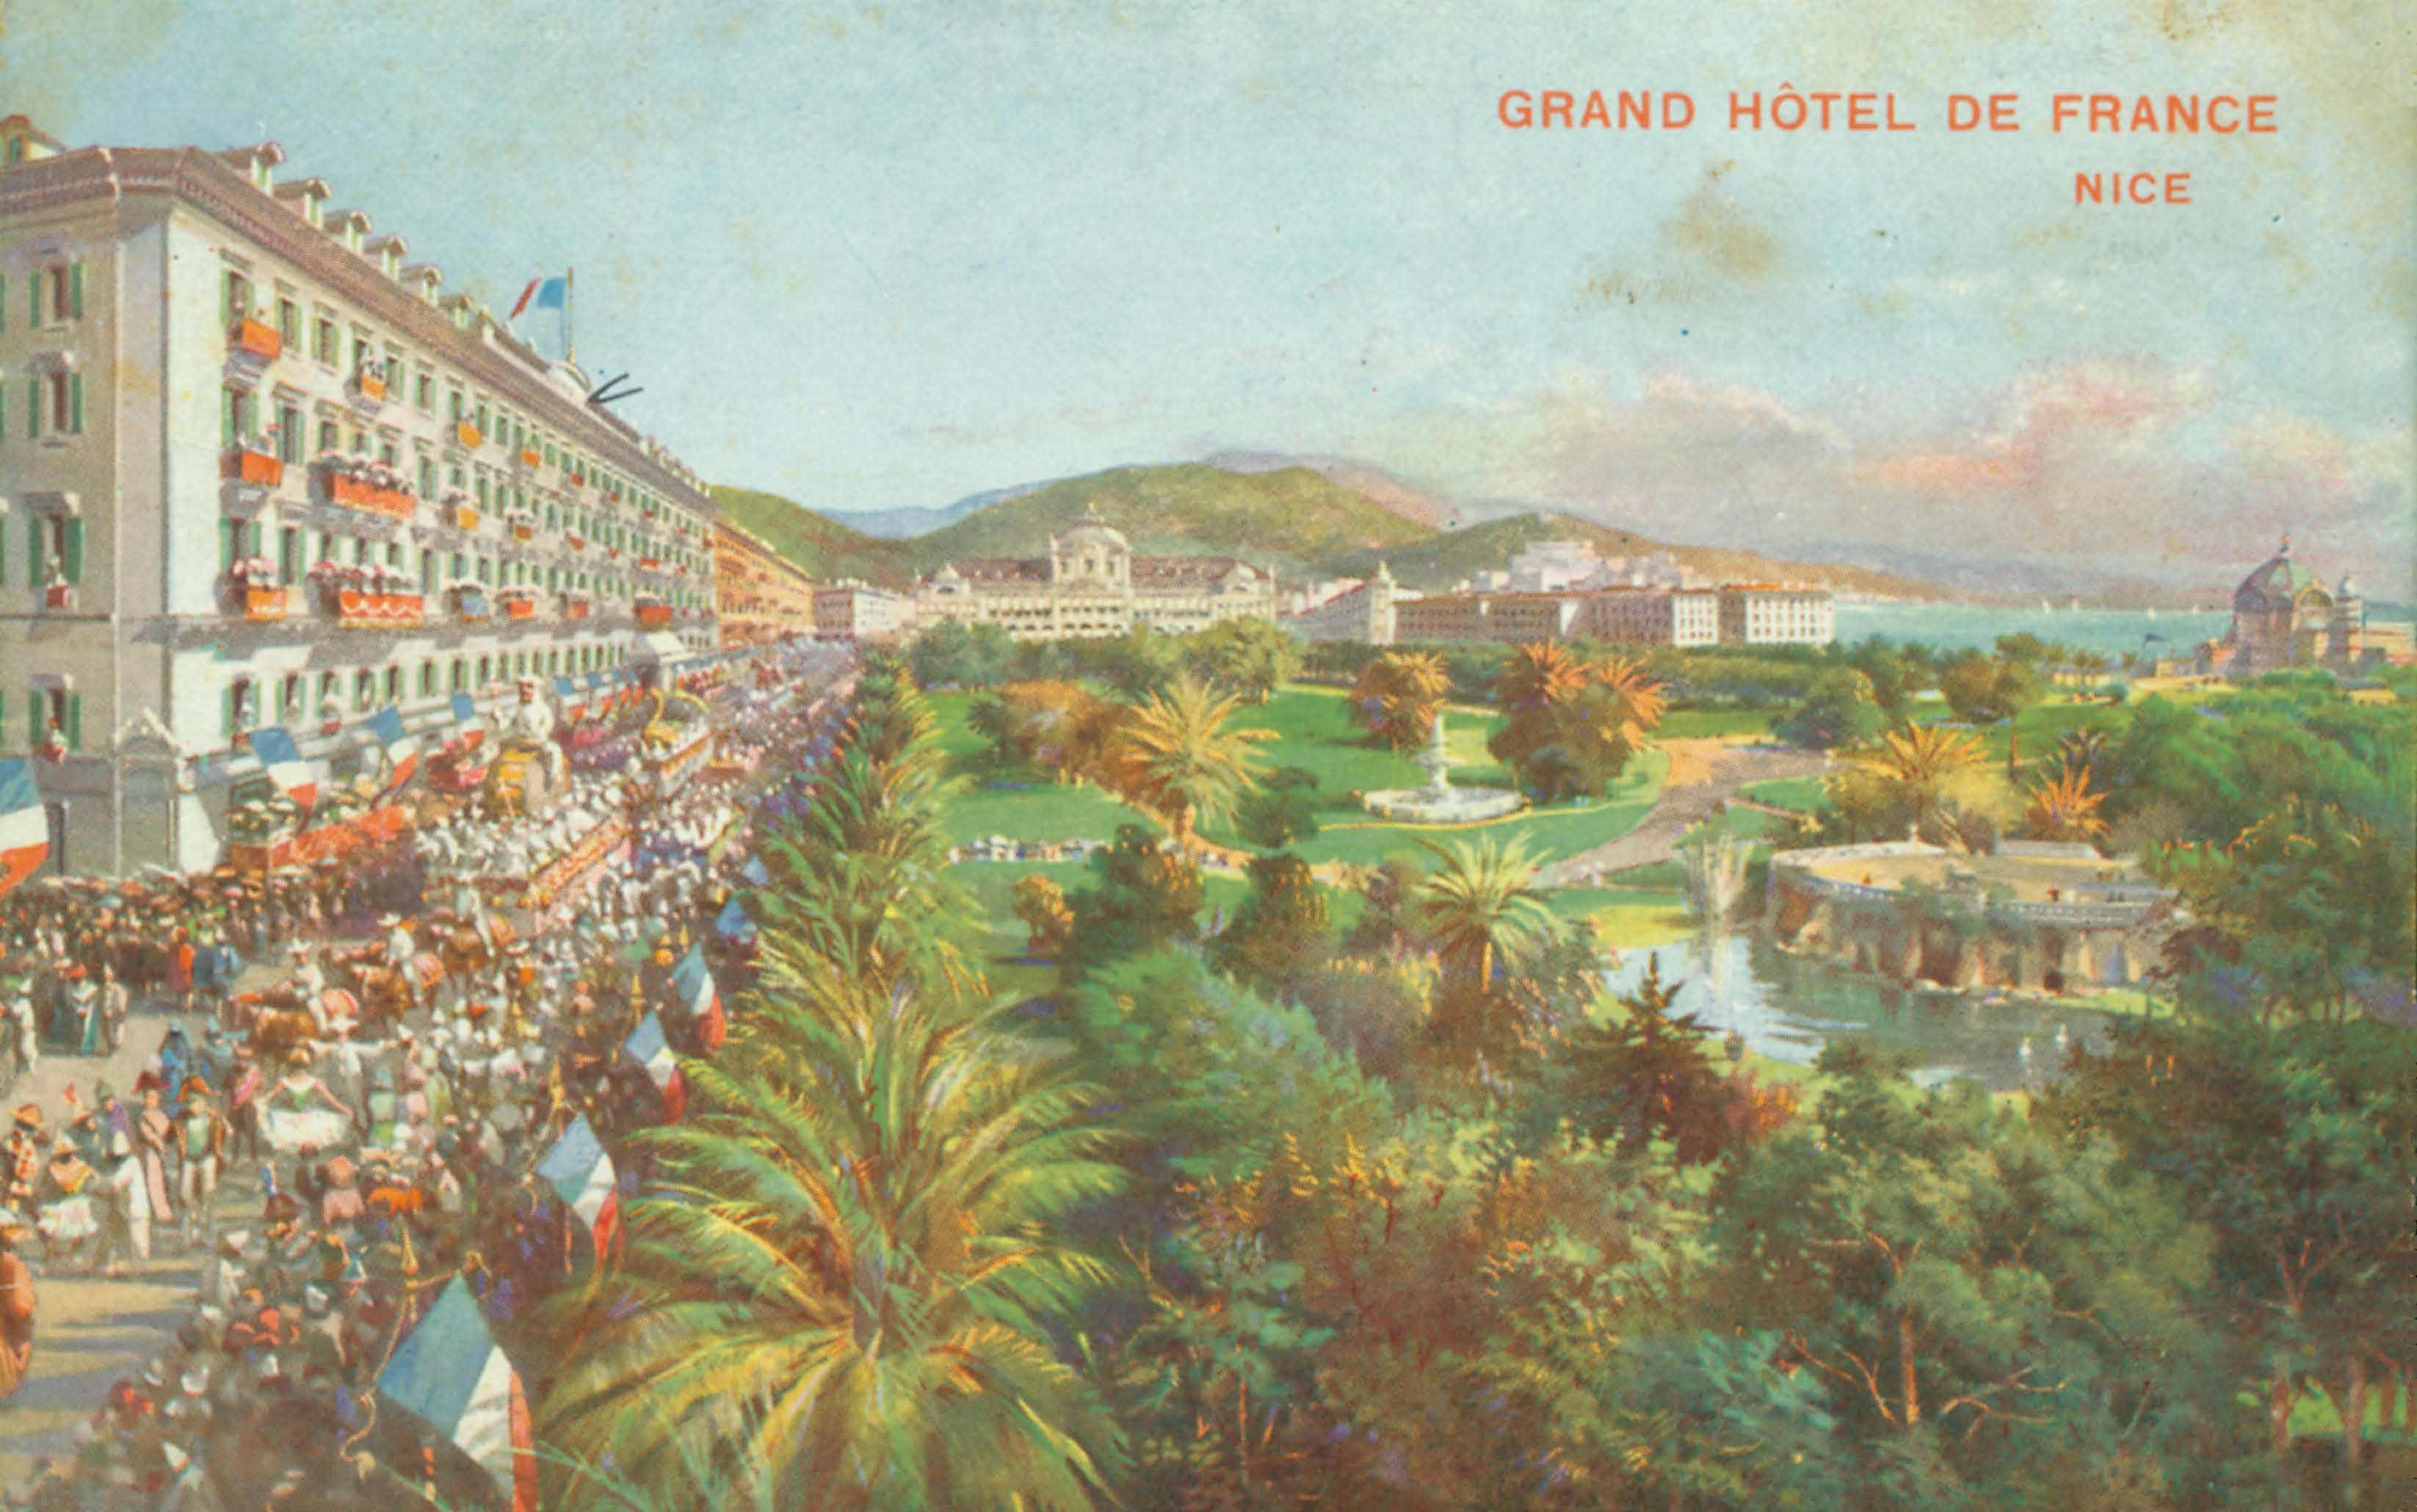 Postcard featuring the Grand Hotel De France.